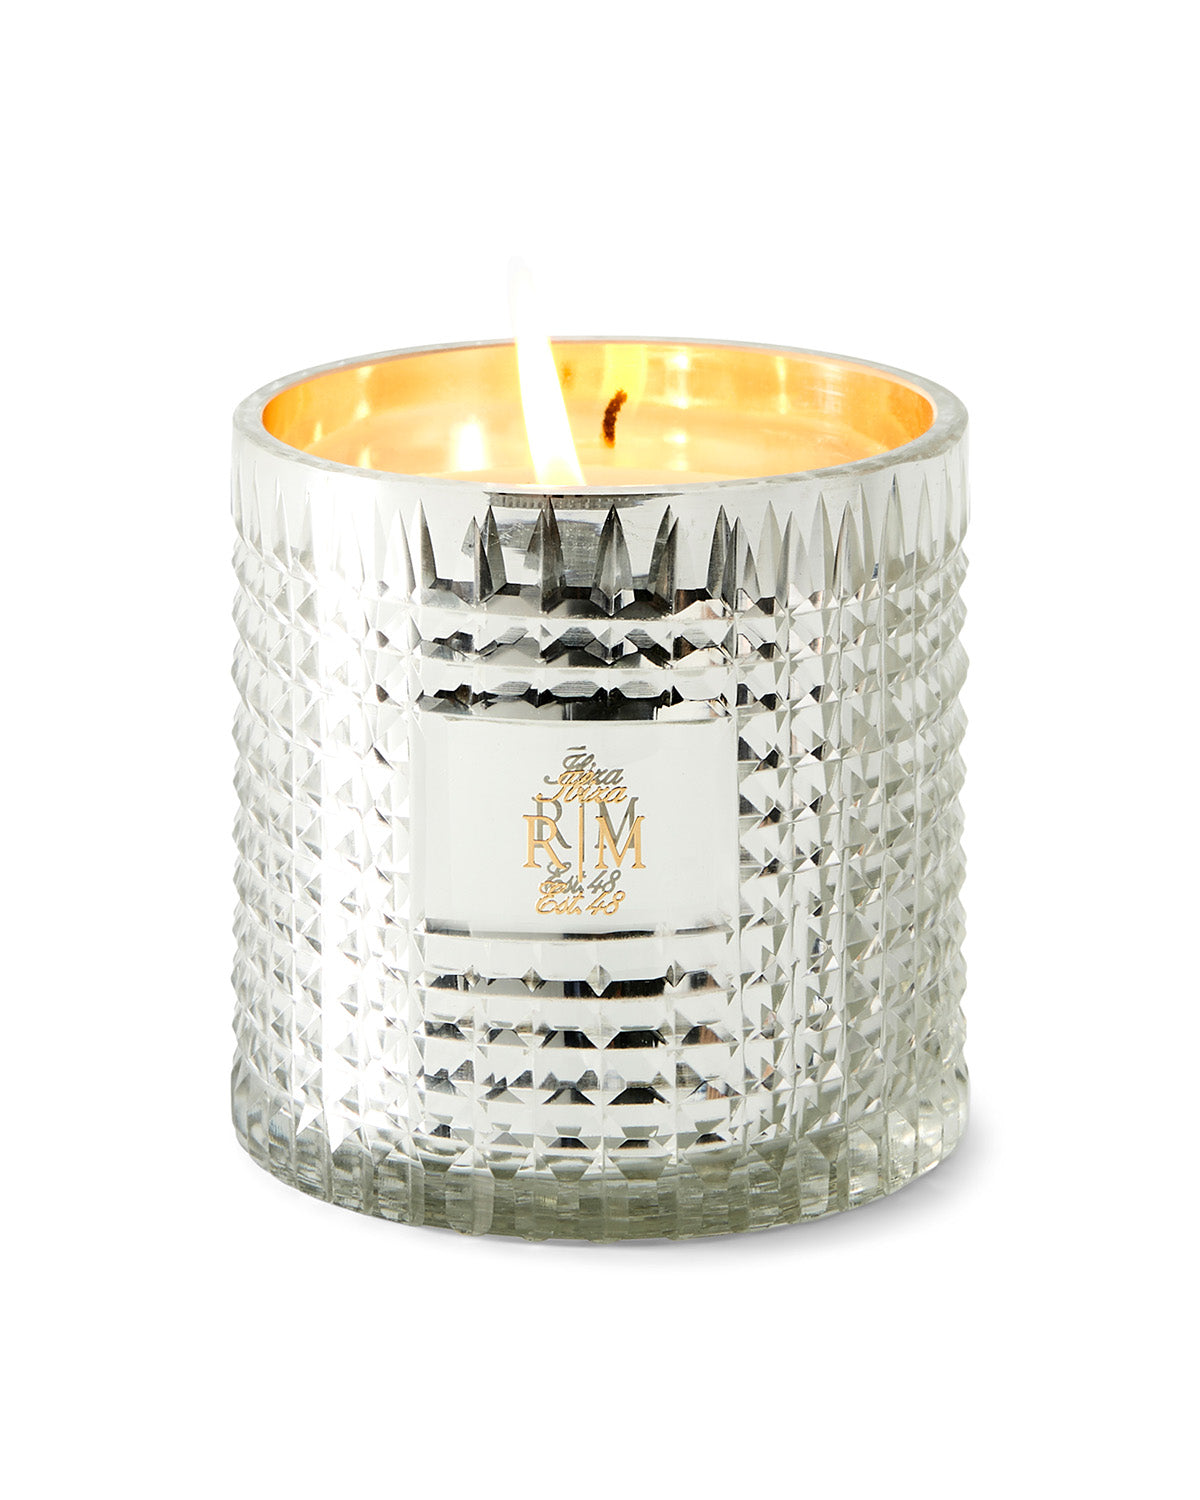 SCENTED CANDLE fig, jasmine, cedar, and lemon by Riviera Maison